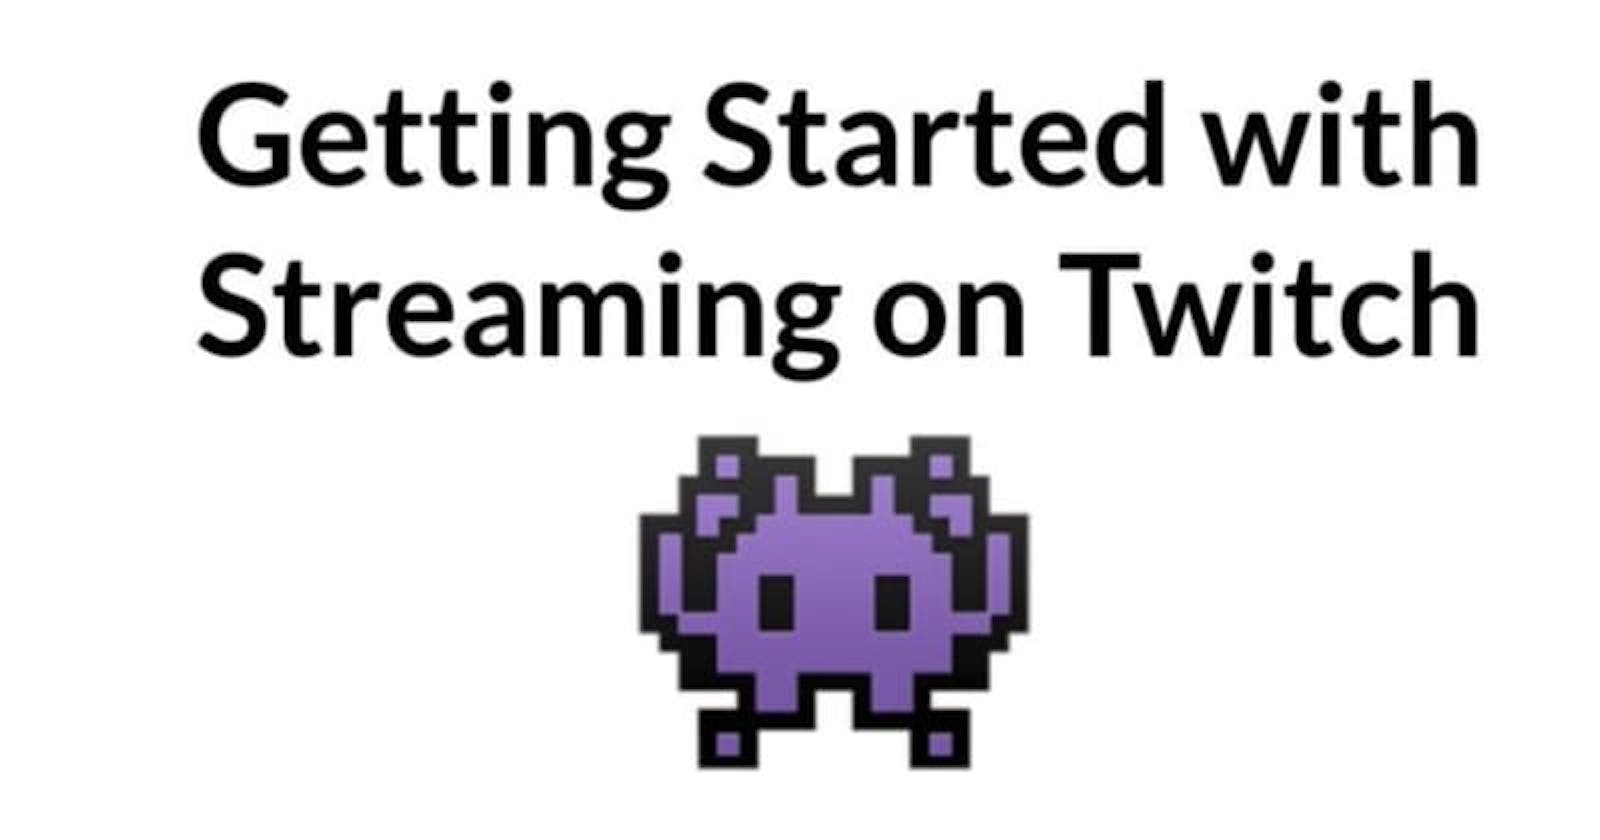 Getting Started with Streaming on Twitch